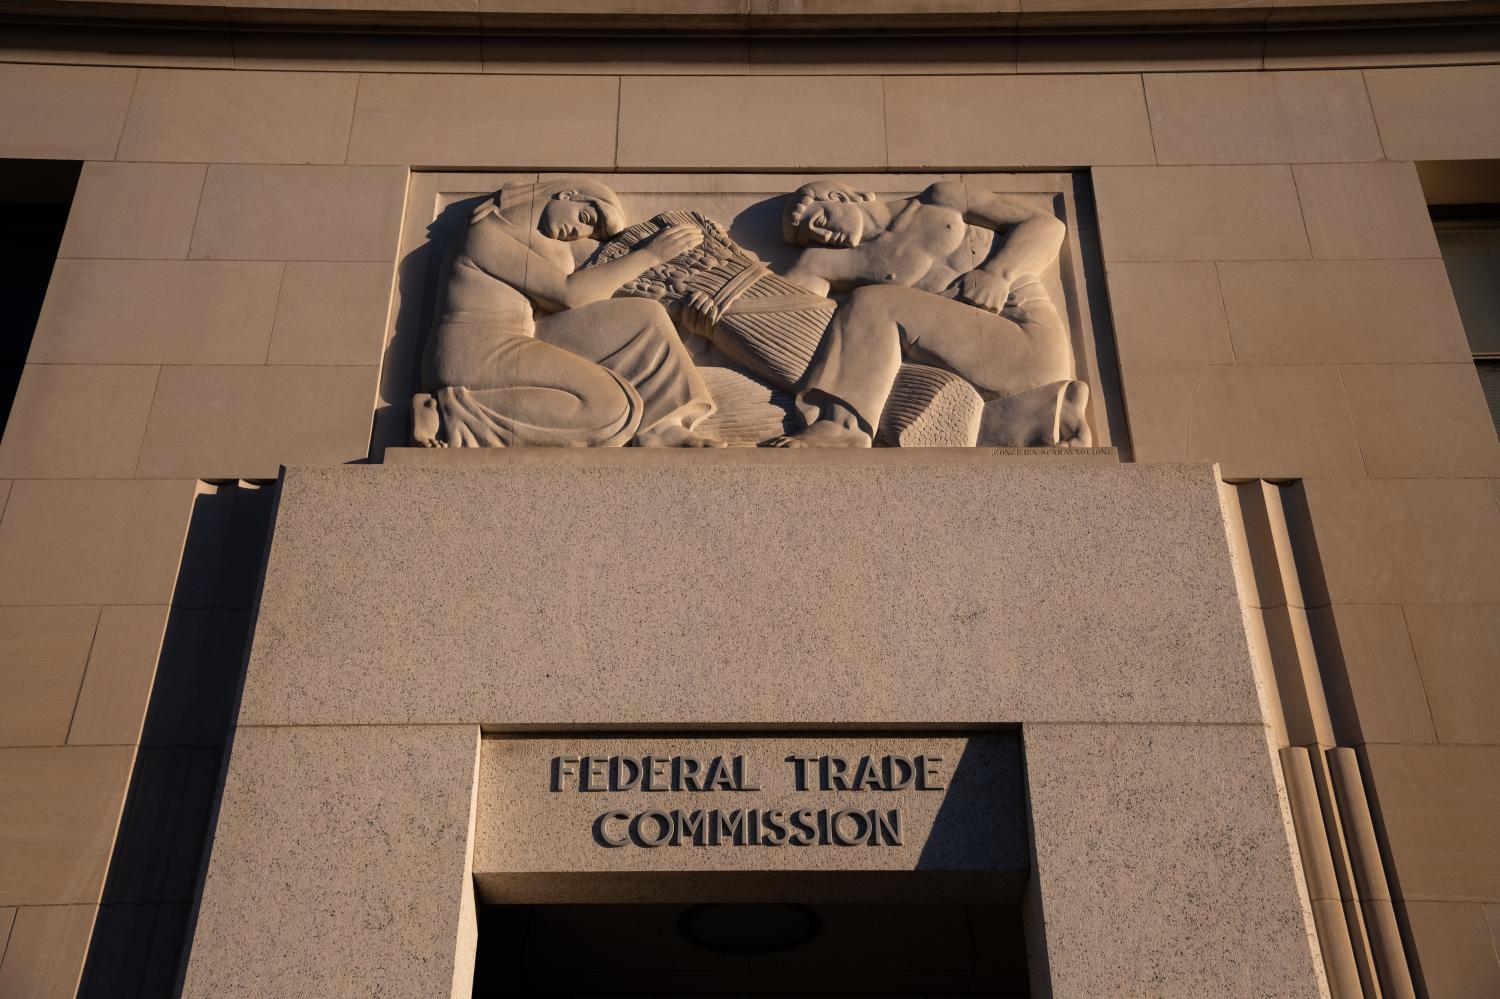 A general view of the U.S. Federal Trade Commission (FTC) building, in Washington, D.C., on Wednesday, October 20, 2021, amid the coronavirus pandemic. According to news reports, President Biden has begun pushing for a scaled down version of his Build Back Better spending plan, in the range of $1.9 trillion instead of $3.5 trillion, as negotiations continue between Democrats on Capitol Hill. (Graeme Sloan/Sipa USA)No Use Germany.